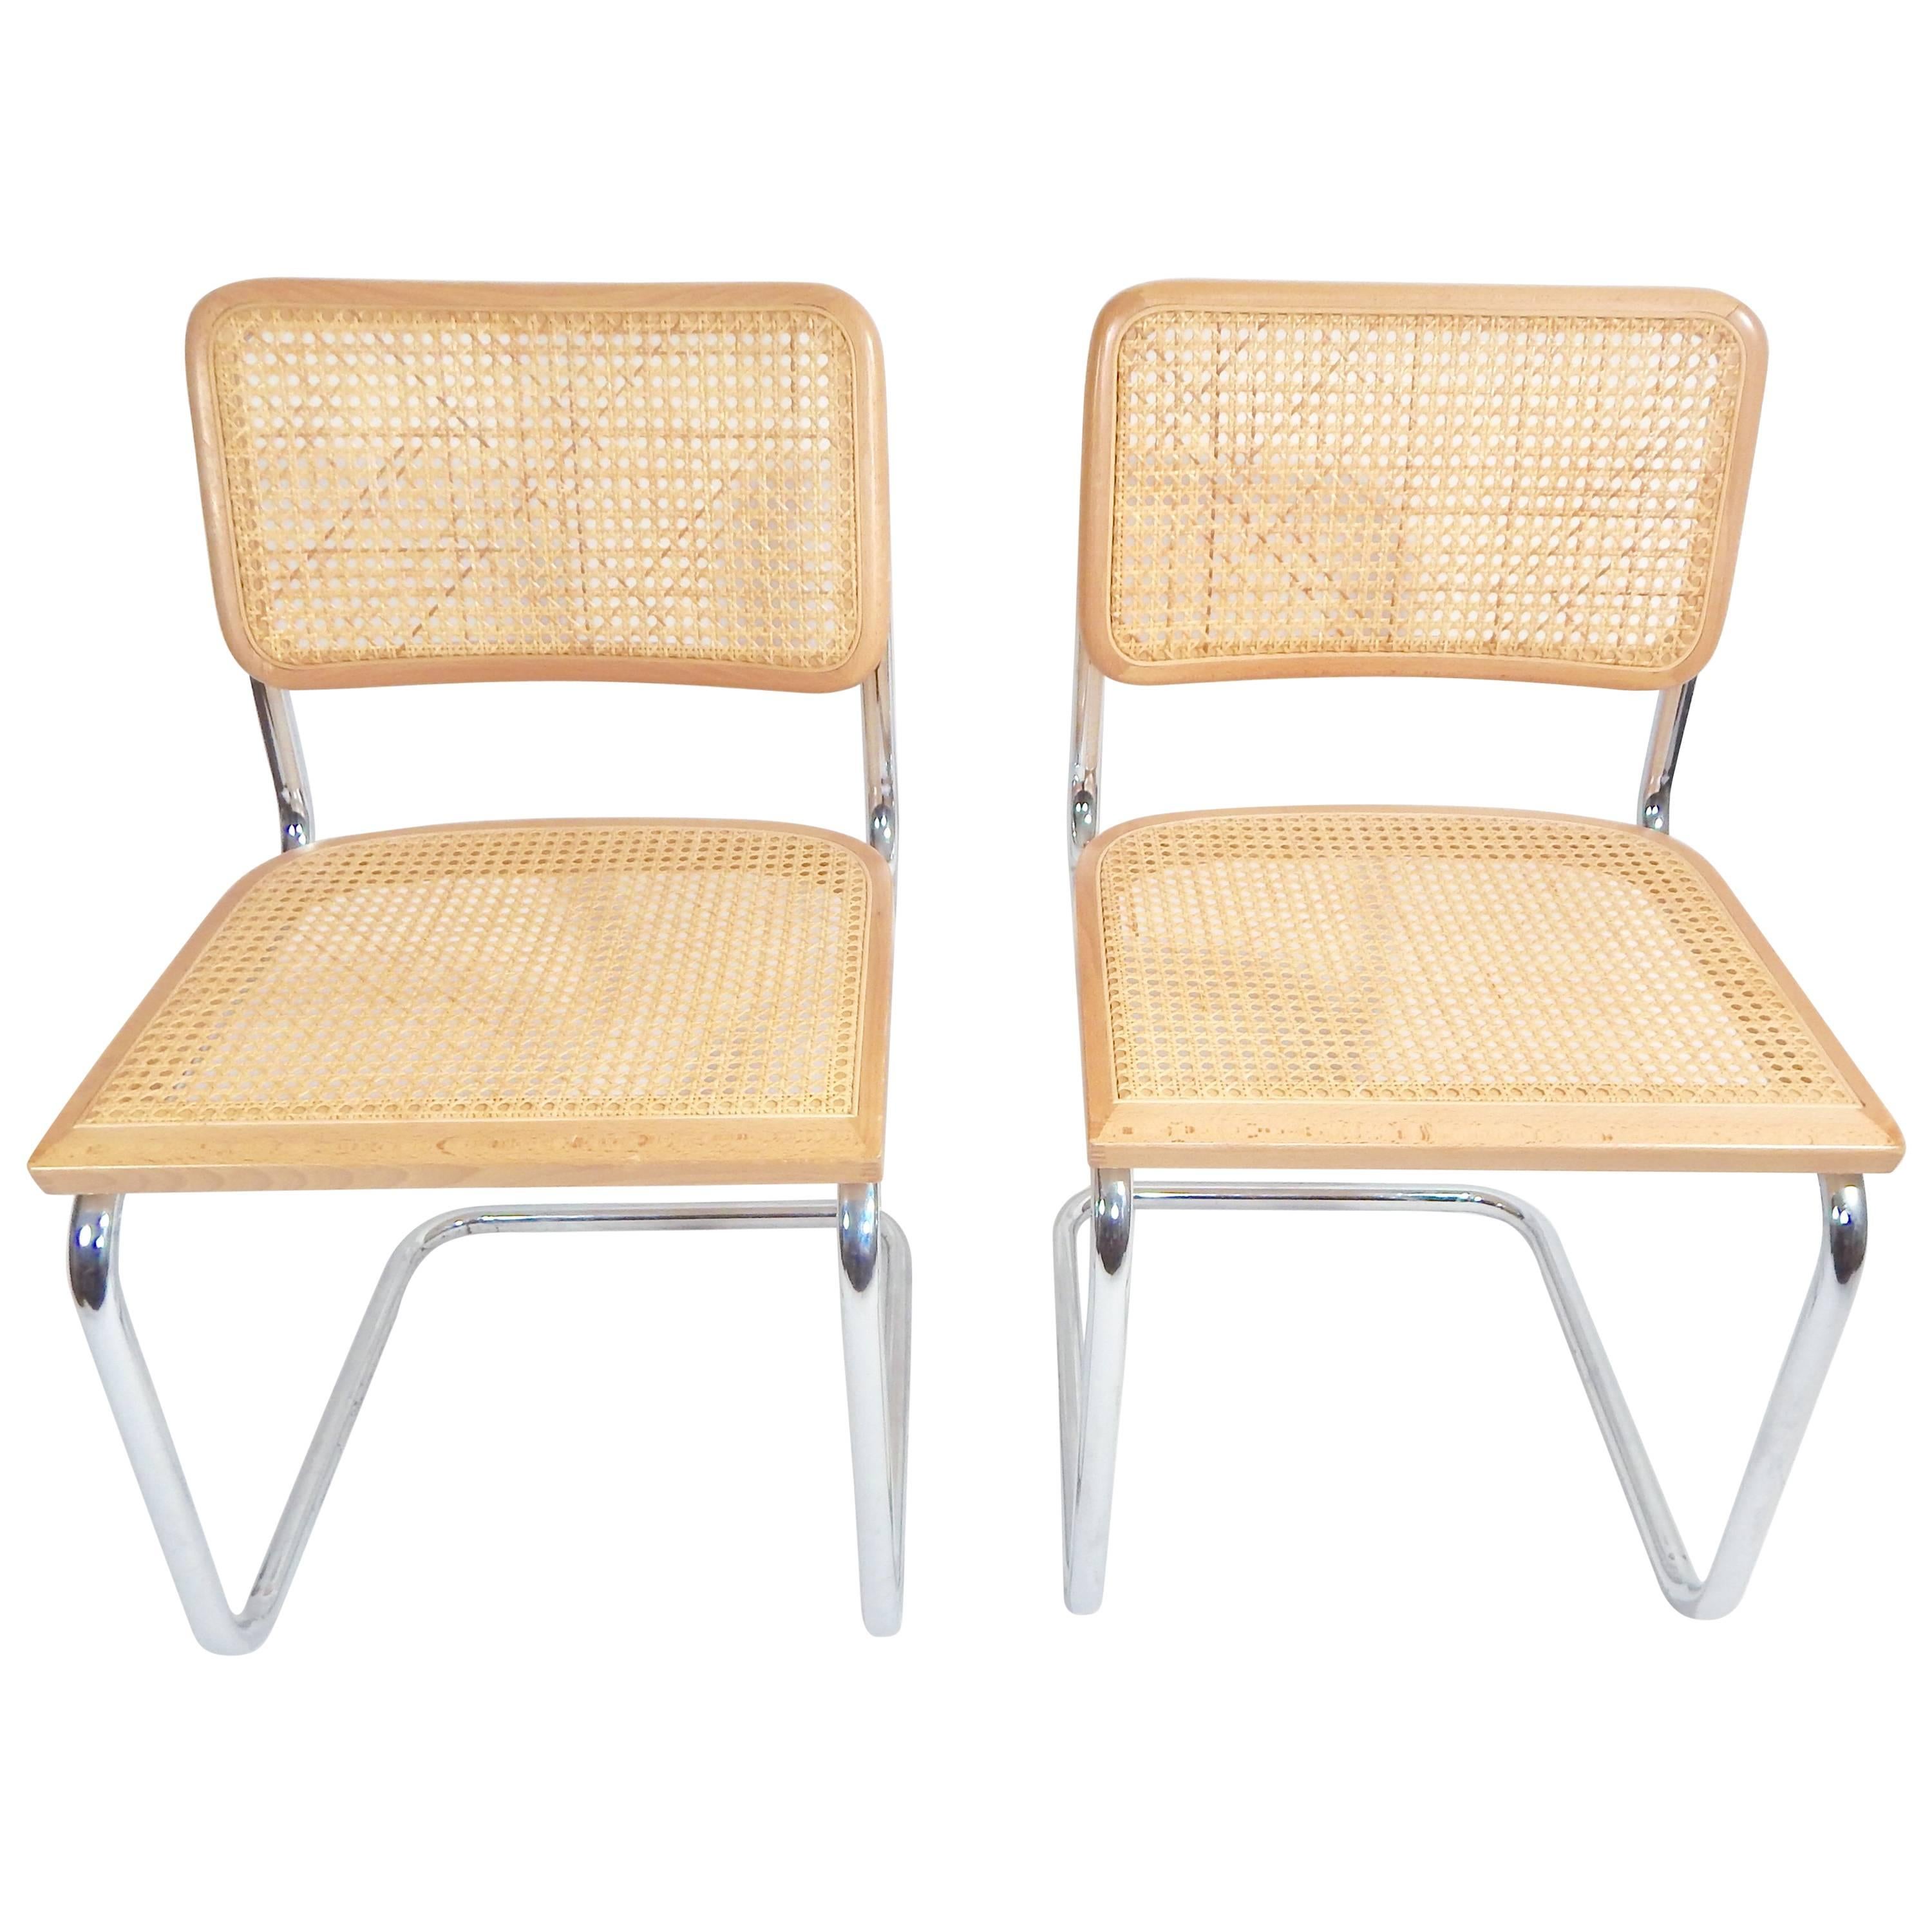 Pair of Marcel Breuer Cane Cesca Chairs